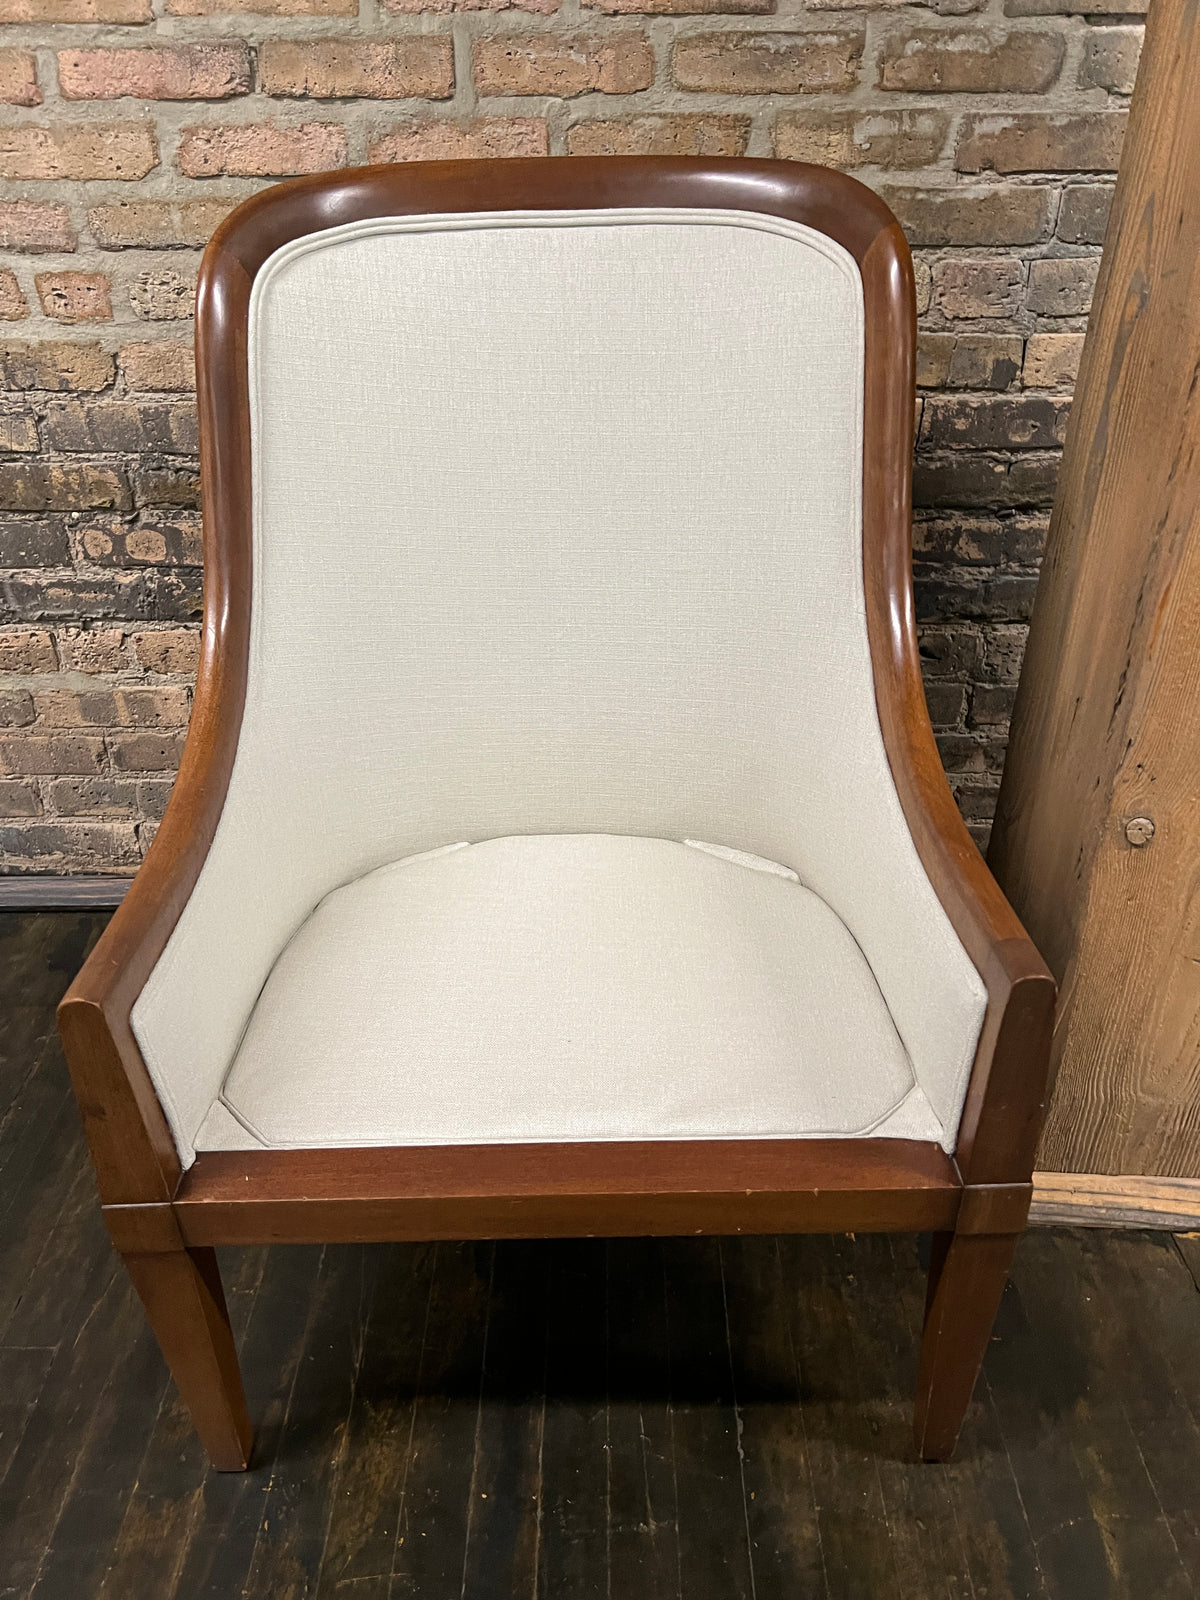 Pair of chairs with lovely solid walnut frames and very light gray linen upholstery (on the front of the chair and the seat cushions). The seat cushions are down filled. The back of the chair is upholstered in a coordinating cut velvet that has shades of cream, black and gray. 